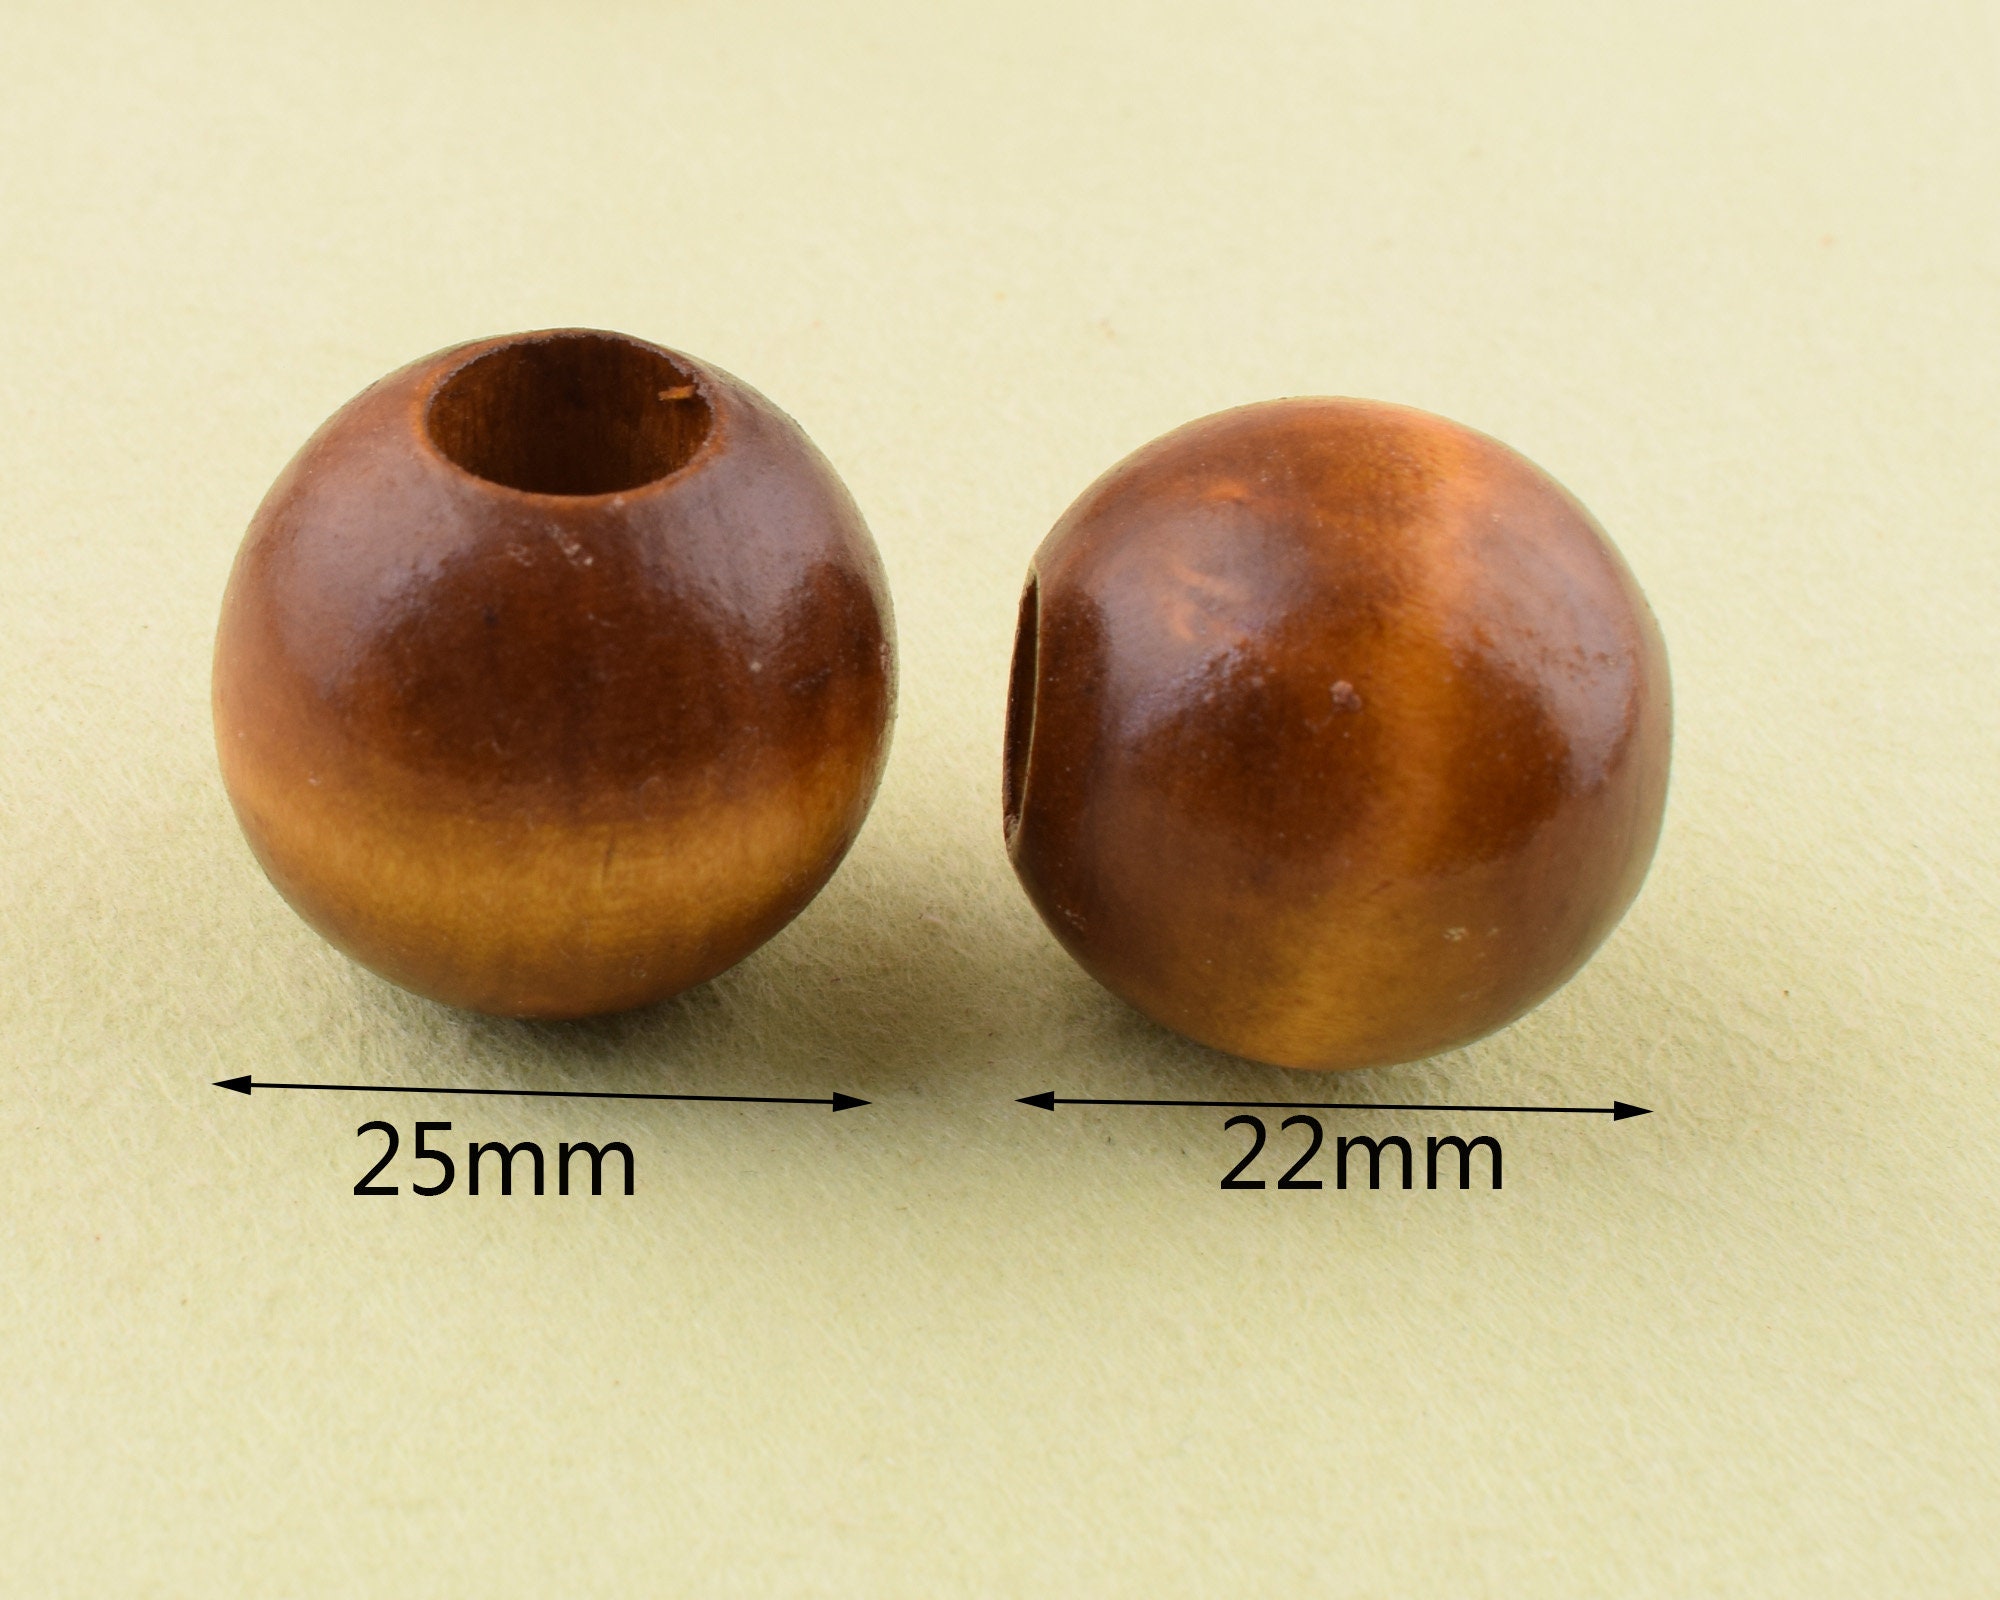 20x15mm UNFINISHED WOOD BEADS // Large Wooden Macrame Beads // 20mm X 15mm  